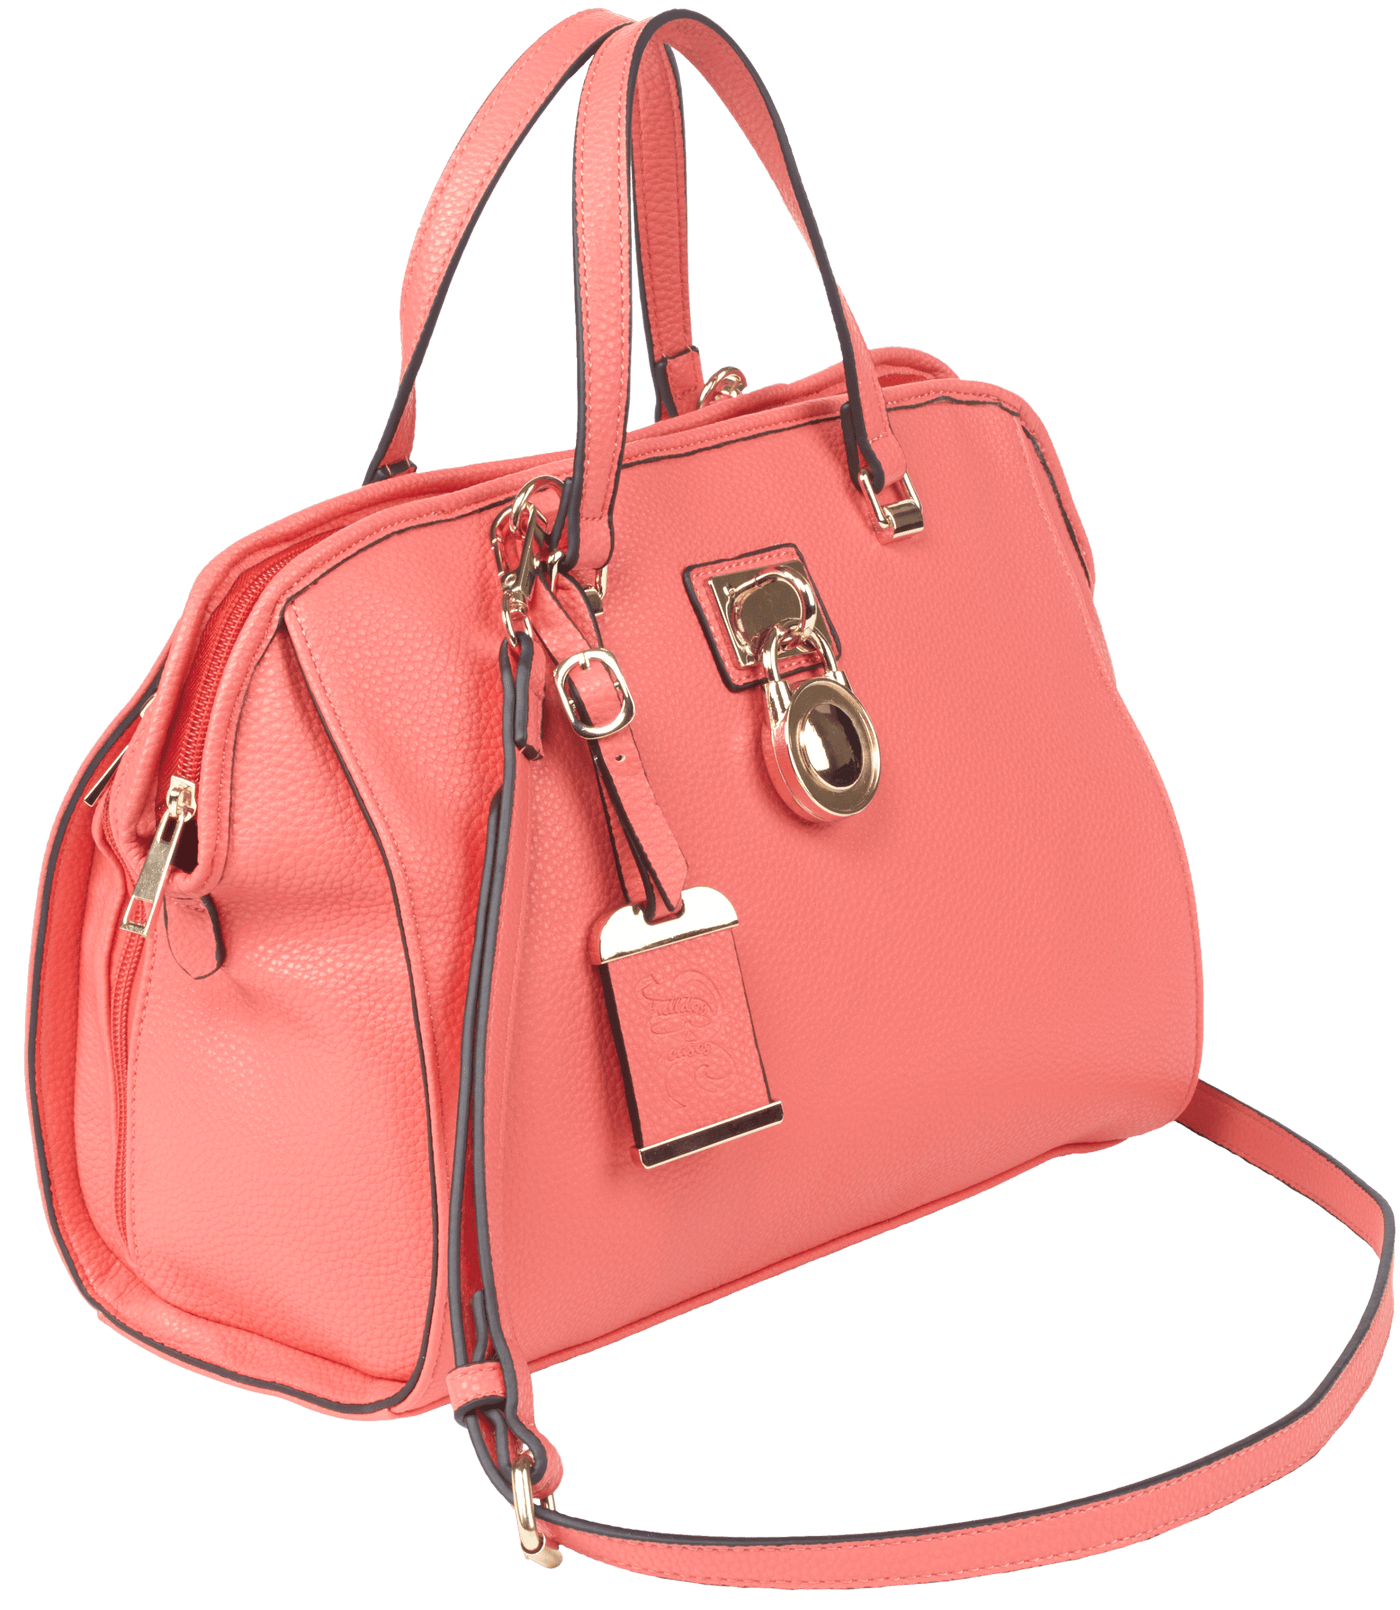 Bulldog Bulldog Concealed Carry Purse - Satchel Coral Concealed Carry Handbags